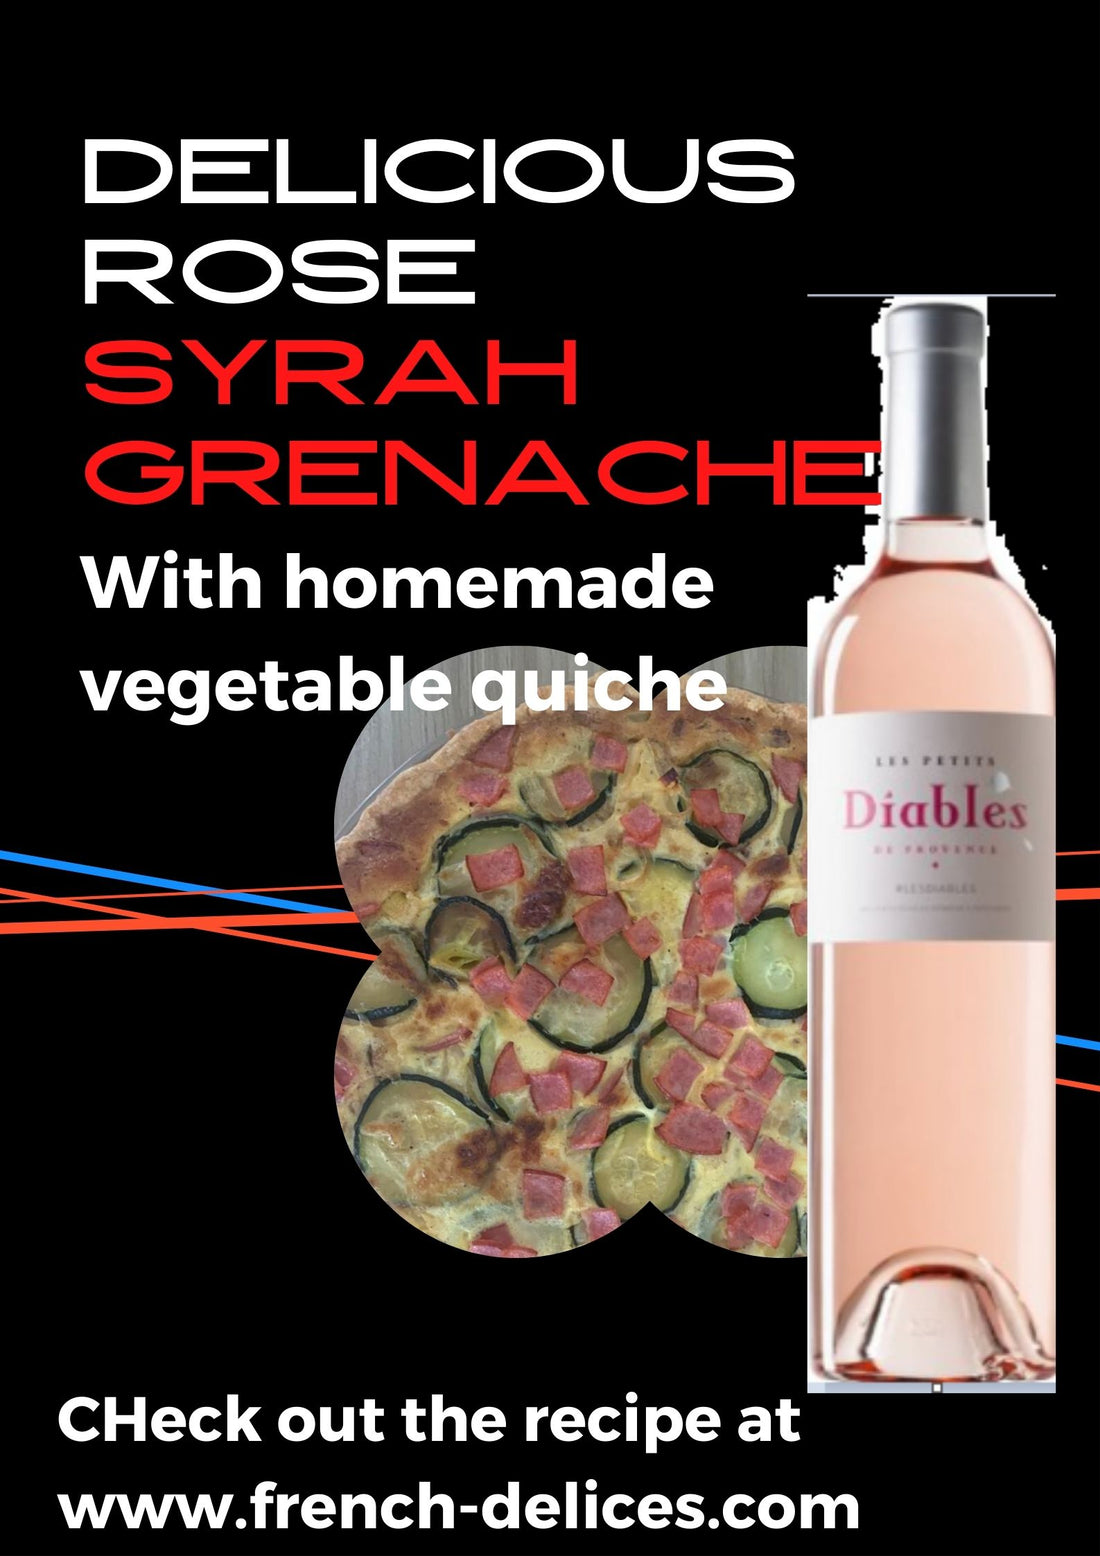 Delicious Rose based on Syrah and Grenache with homemade quiche recipe